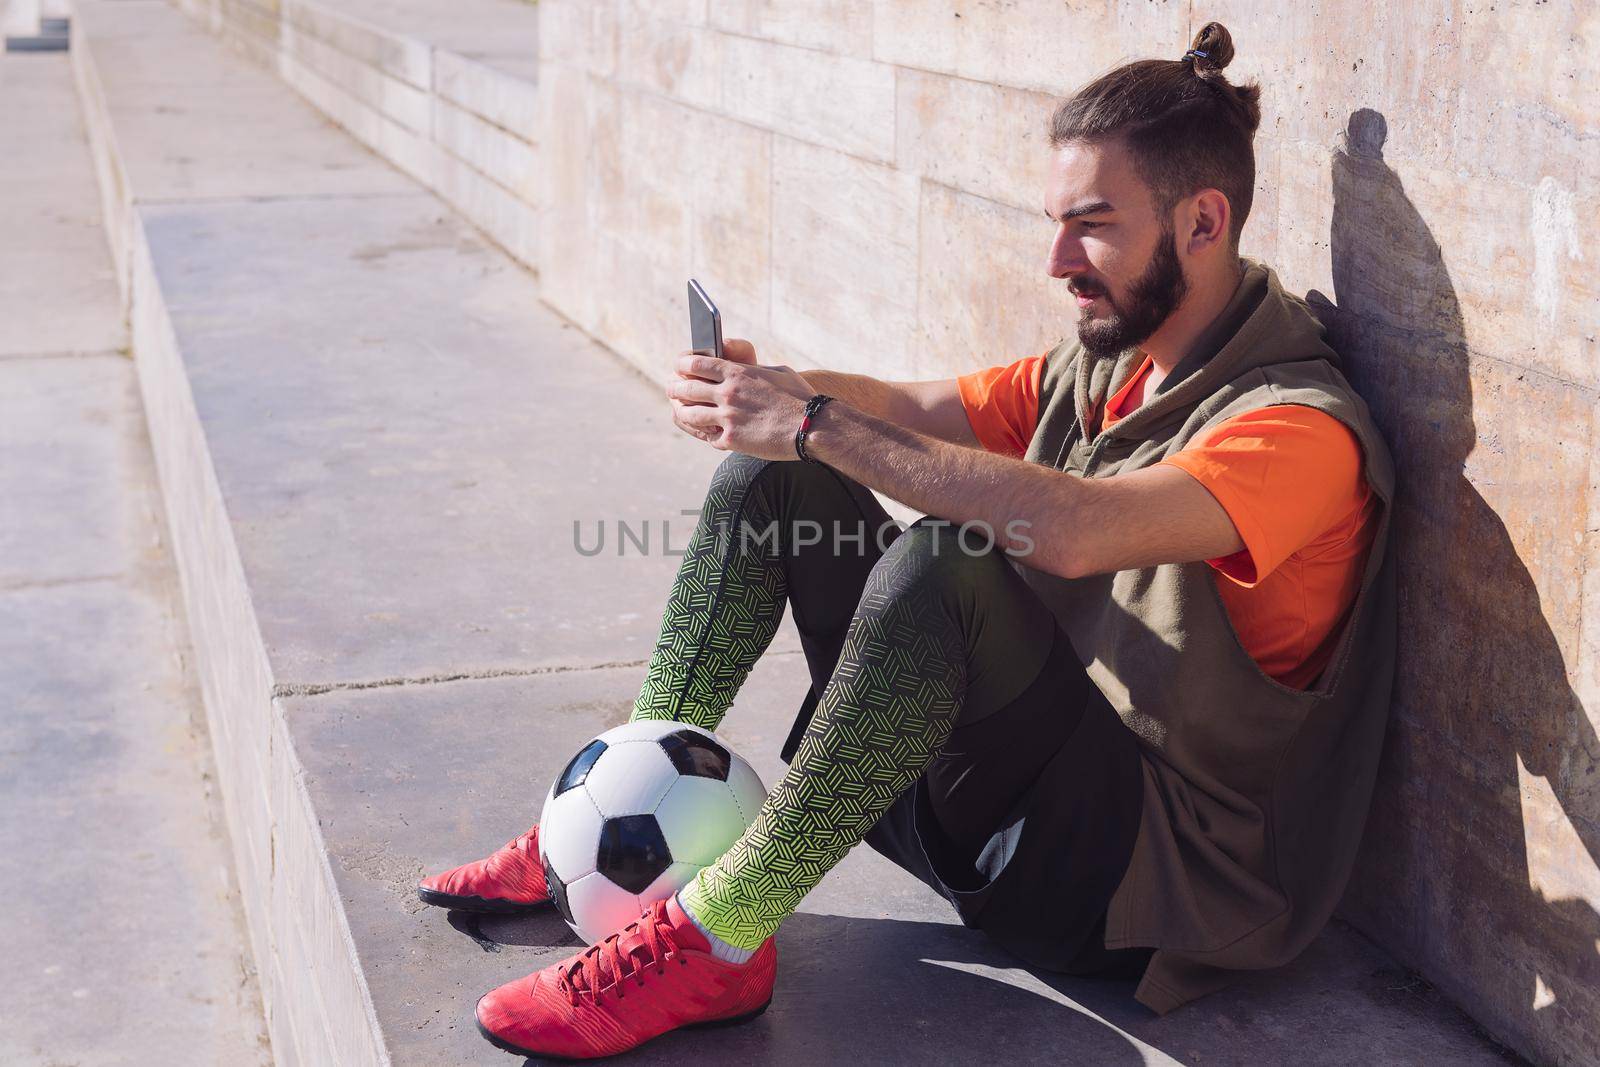 fashionable football player rest sitting on the court consulting his mobile phone, concept of technology and urban sport lifestyle in the city, copy space for text